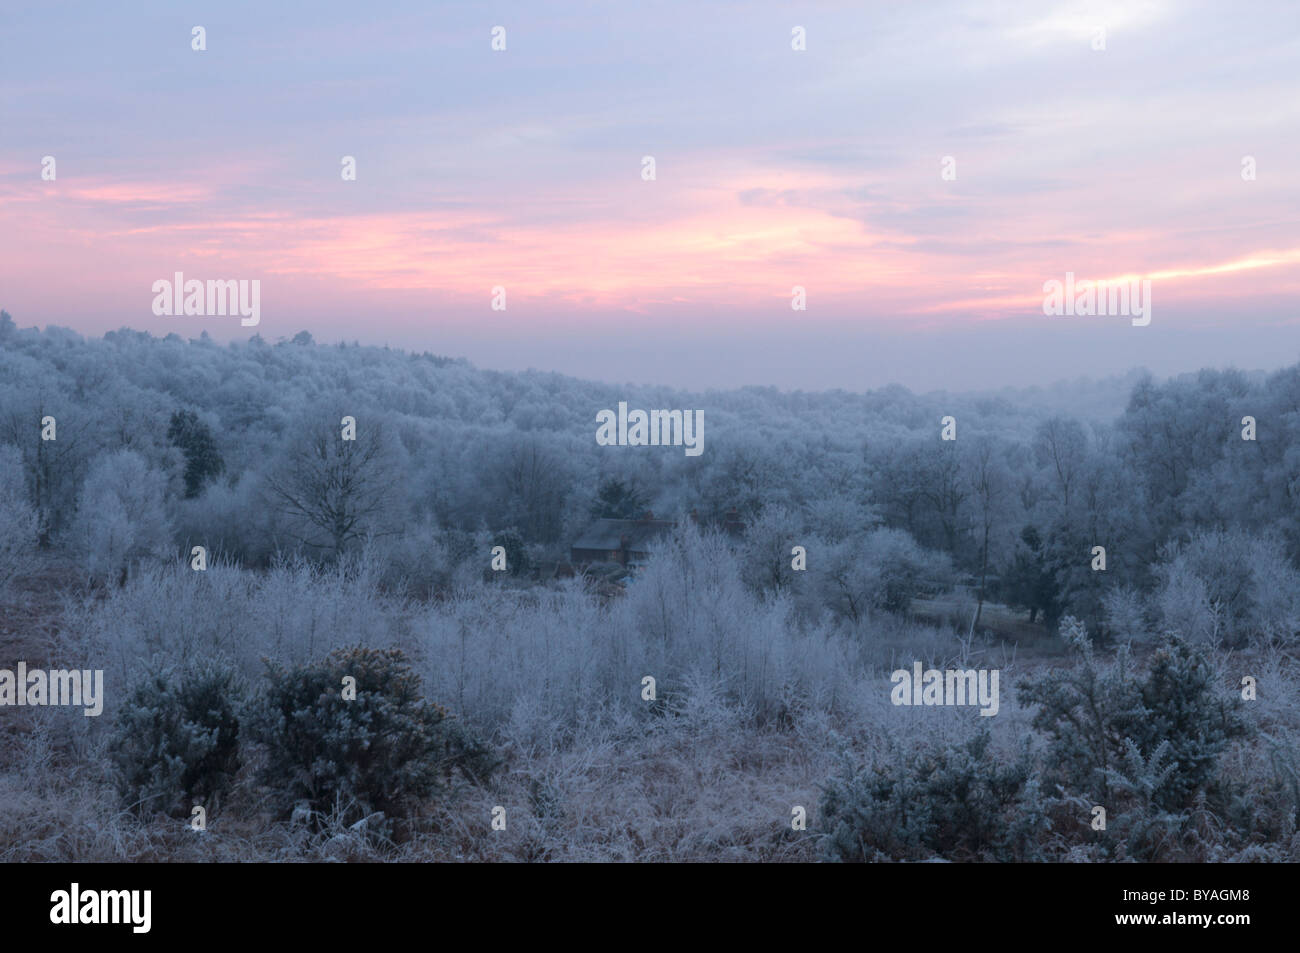 Hoar frost on trees. Woolbeding Common, near Midhurst, West Sussex, UK. January. Dusk at sunset. Stock Photo